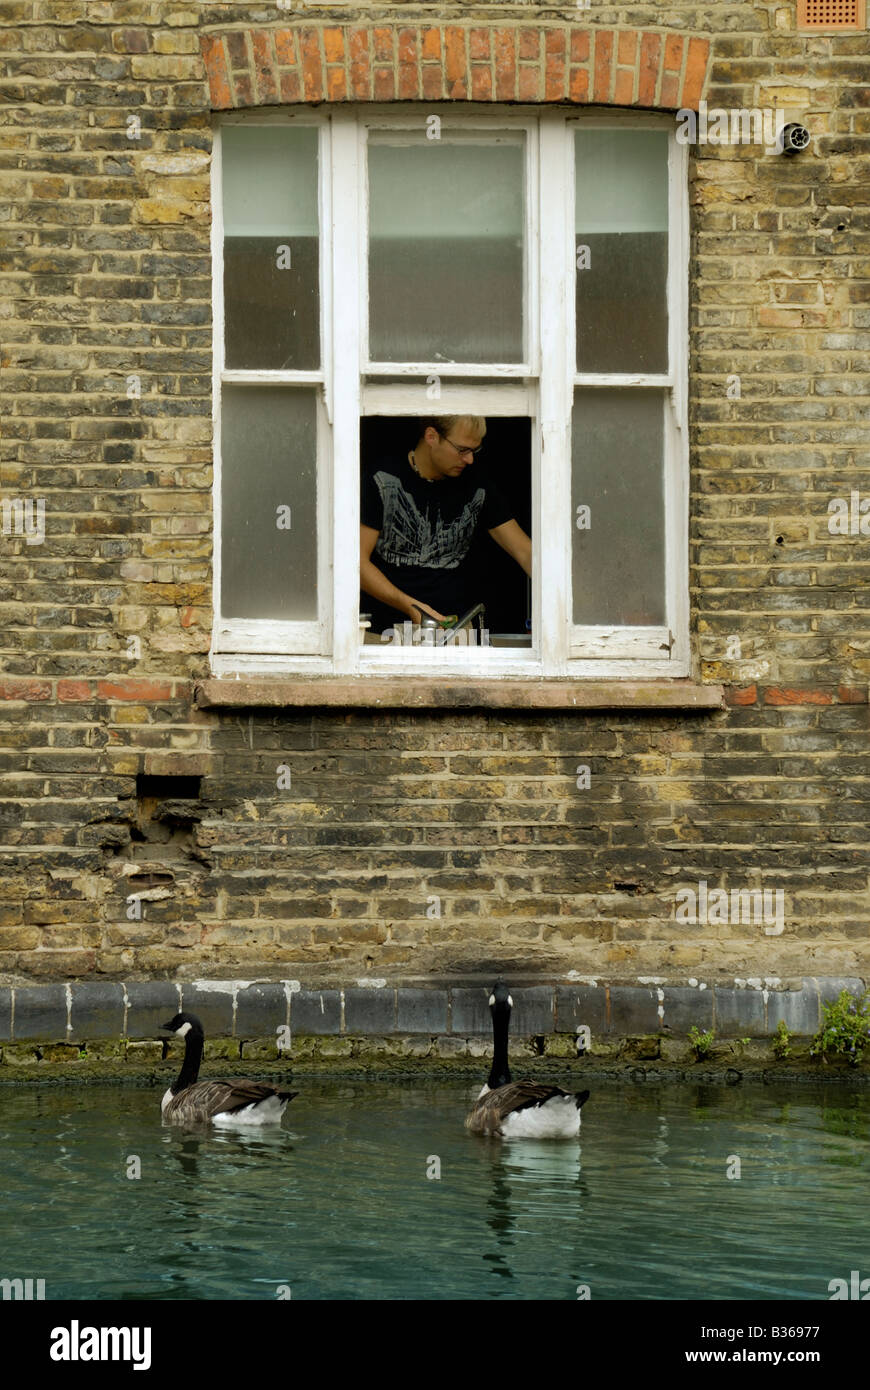 Grand Union Canal, London, view though window of man working in kitchen while Canadian geese wait for food Stock Photo